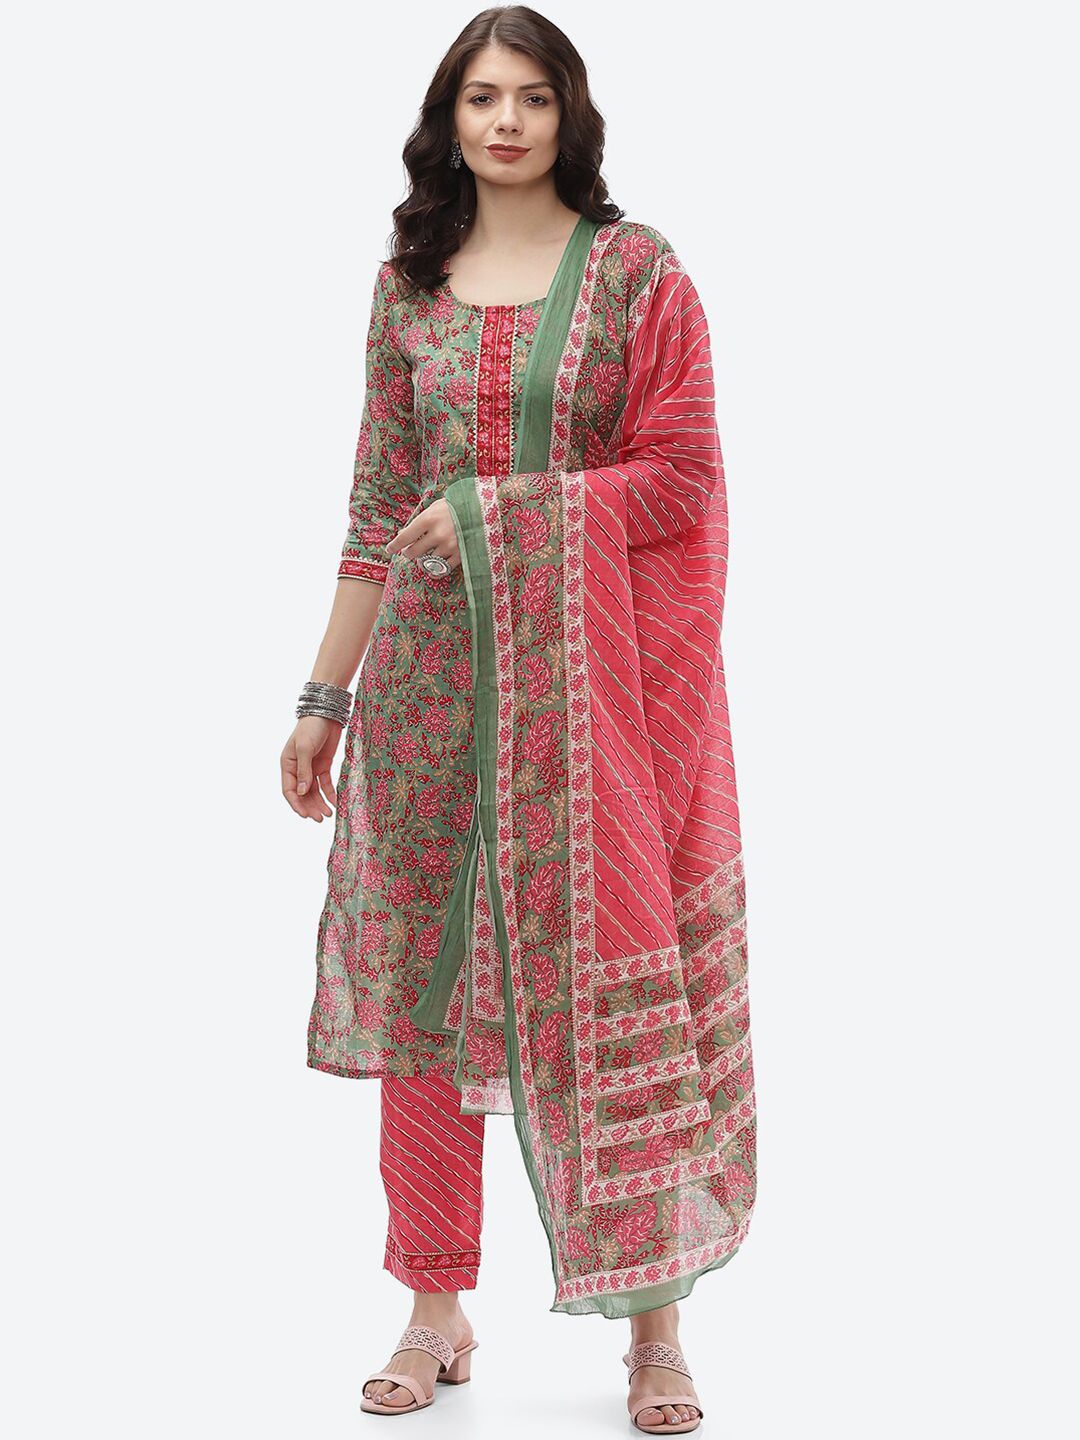 Biba Green & Pink Unstitched Dress Material Price in India